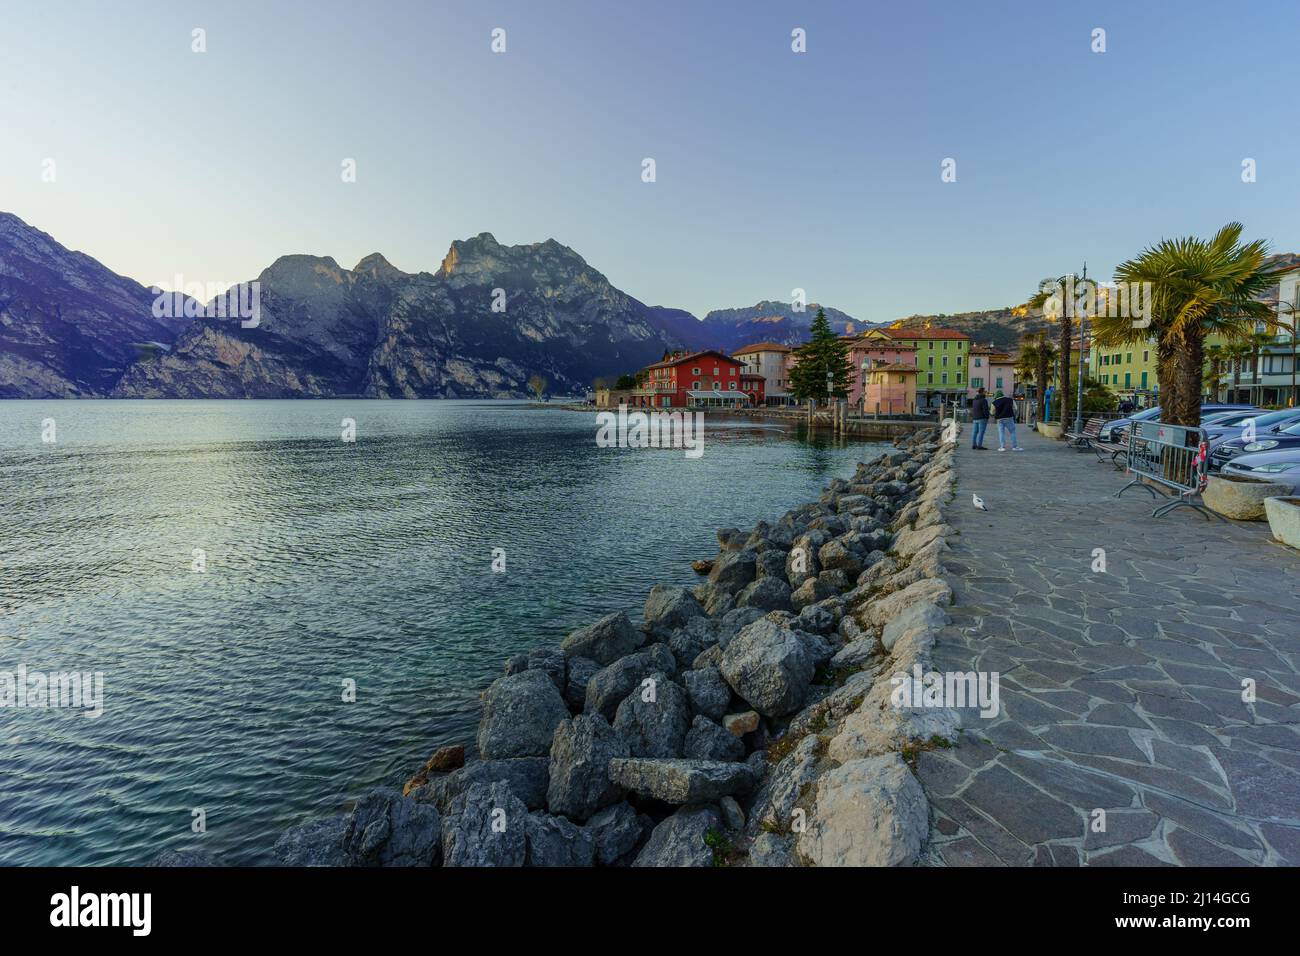 Nago–Torbole, Italy - February 26, 2022: View of the north shore of Lake  Garda, with locals and visitors, on a clear winter day, in Nago–Torbole,  Tren Stock Photo - Alamy